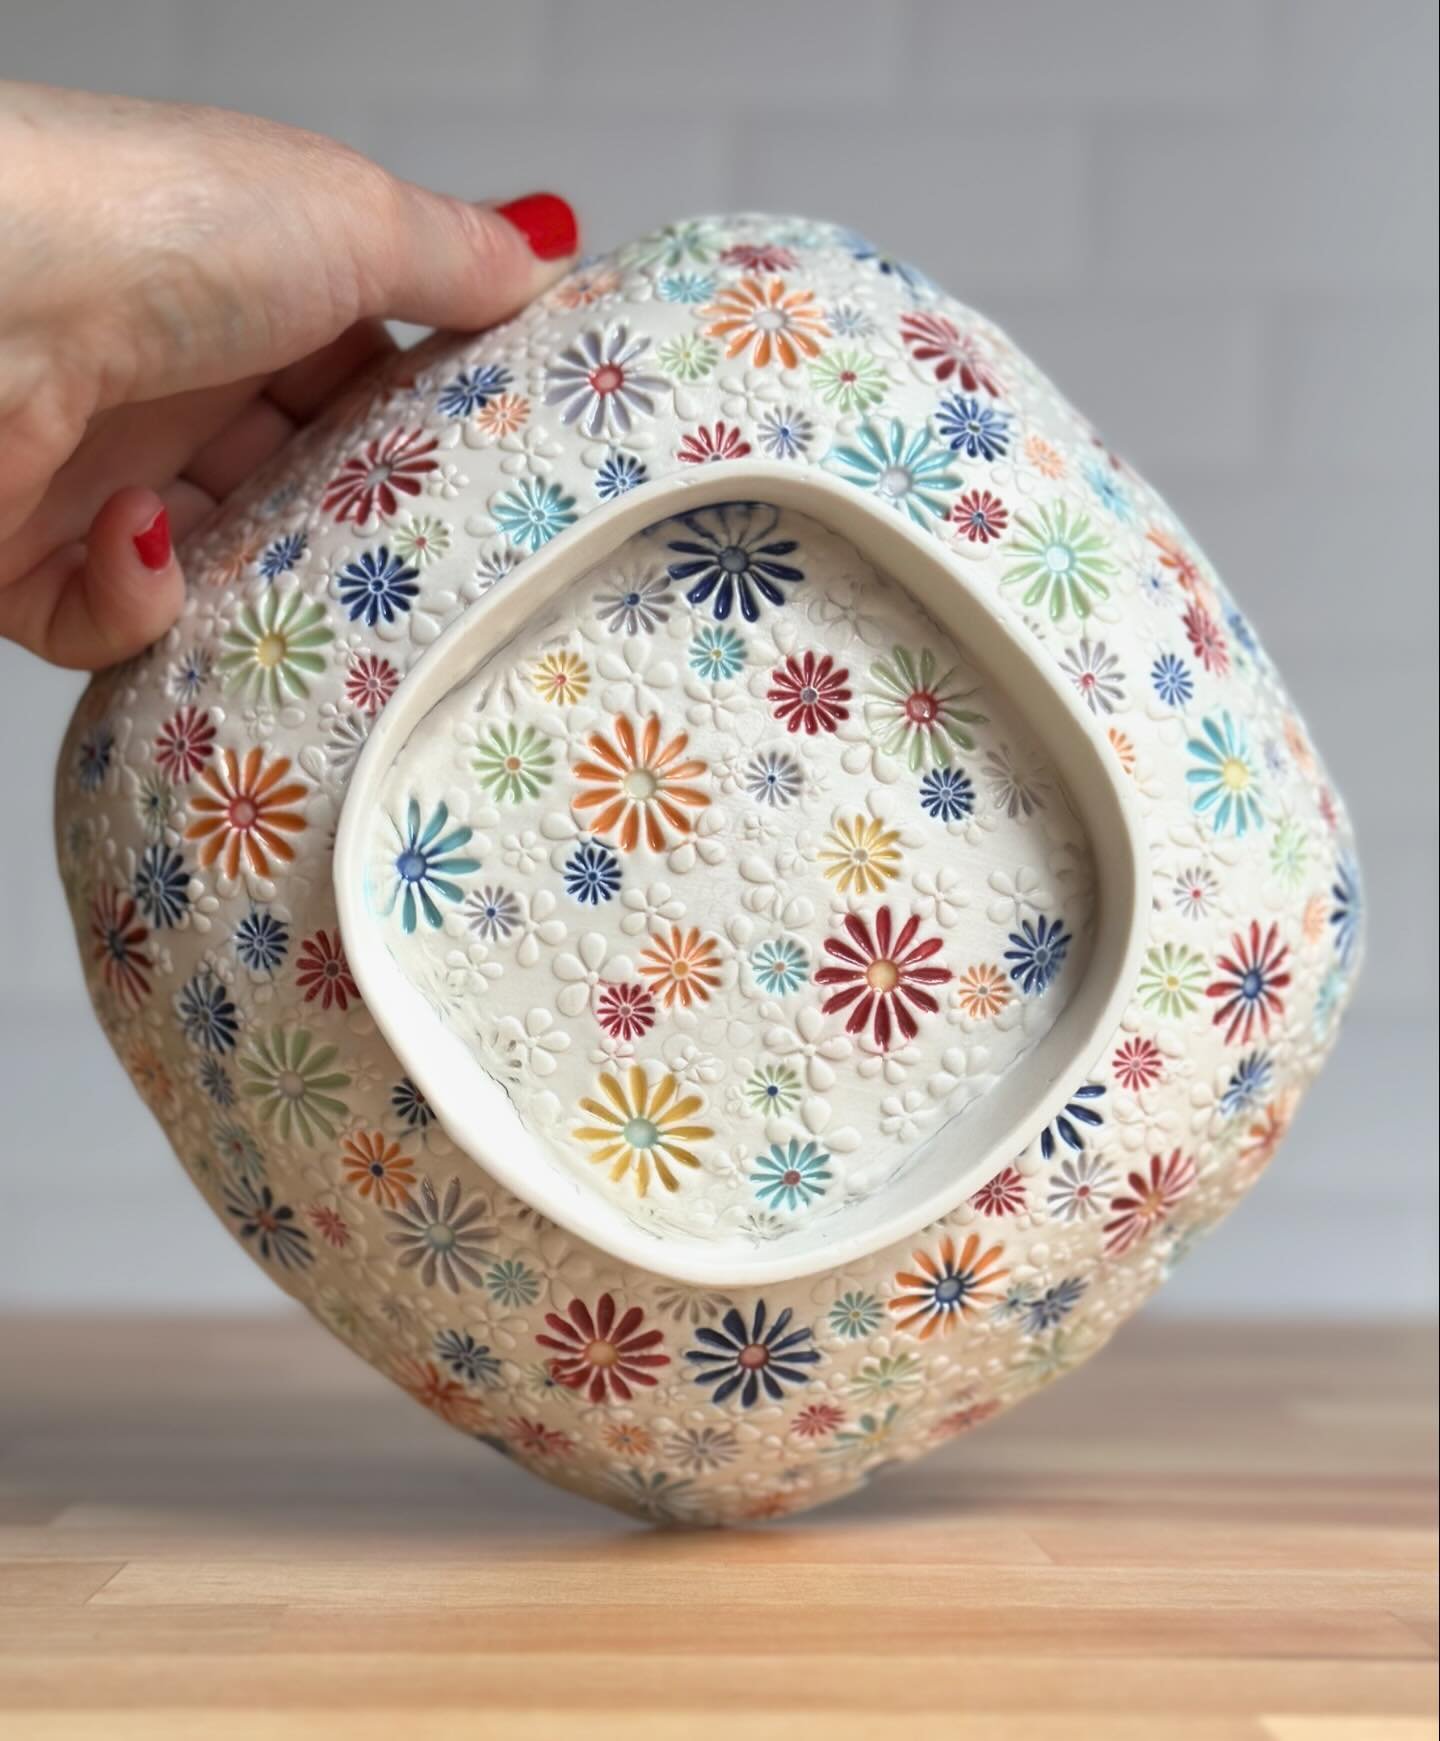 Is it Friday yet???? I&rsquo;m so ready!  Here is a new &ldquo;Daisyware&rdquo; salad bowl I made for this update. I have some vintage Pyrex square bowls that I made plaster molds from years ago, and decided it was finally time to use them!  I love t